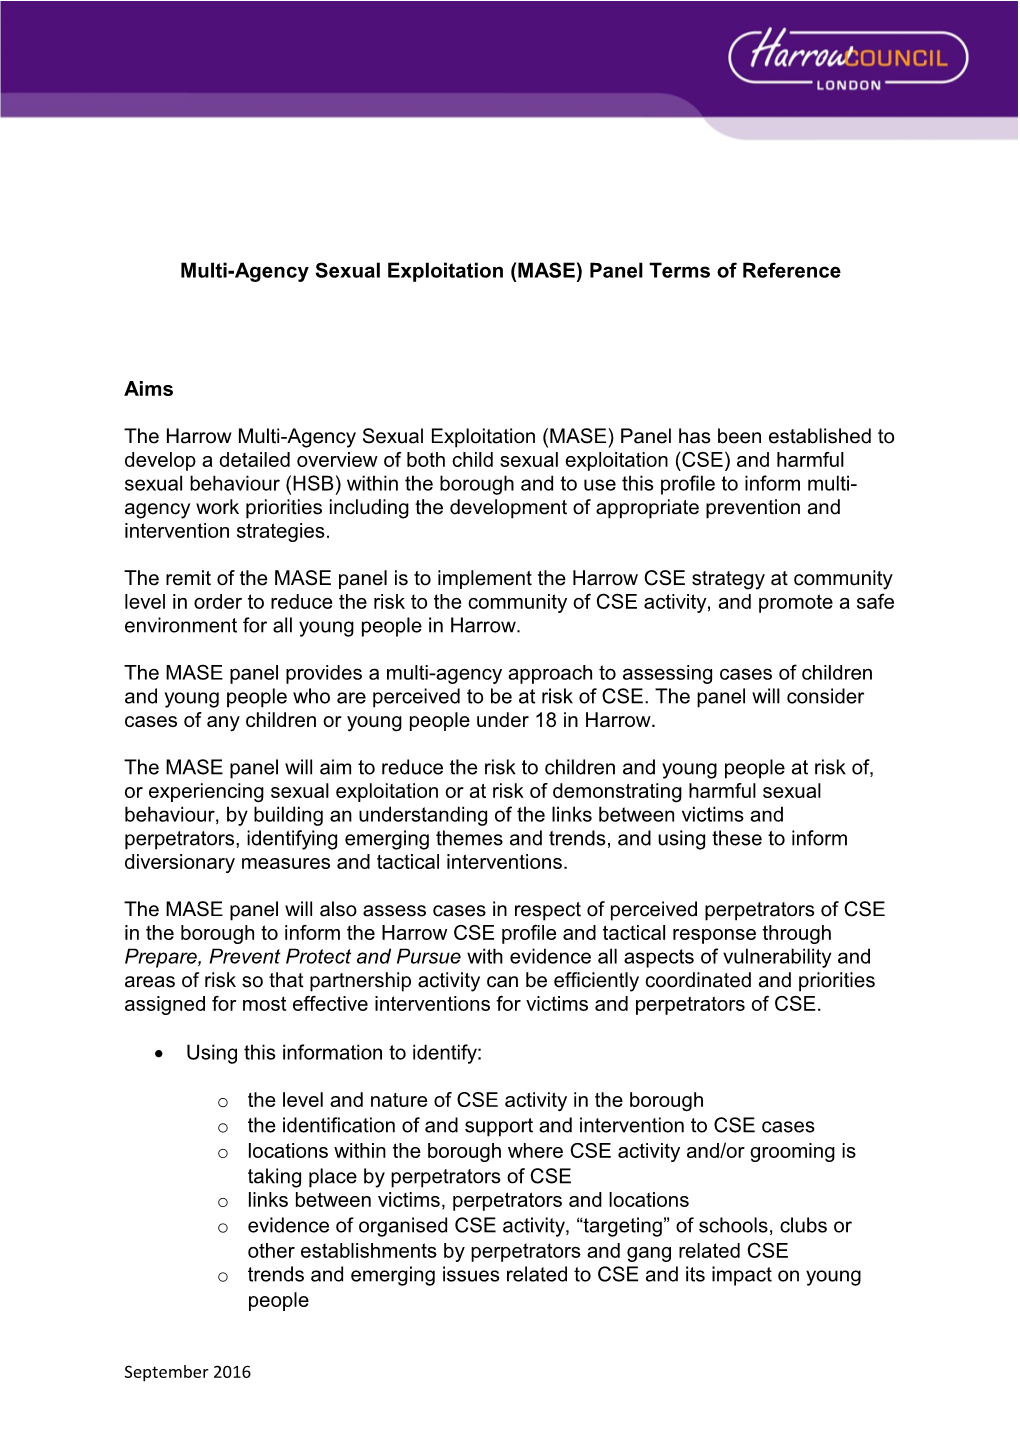 Multi-Agency Sexual Exploitation (MASE) Panel Terms of Reference